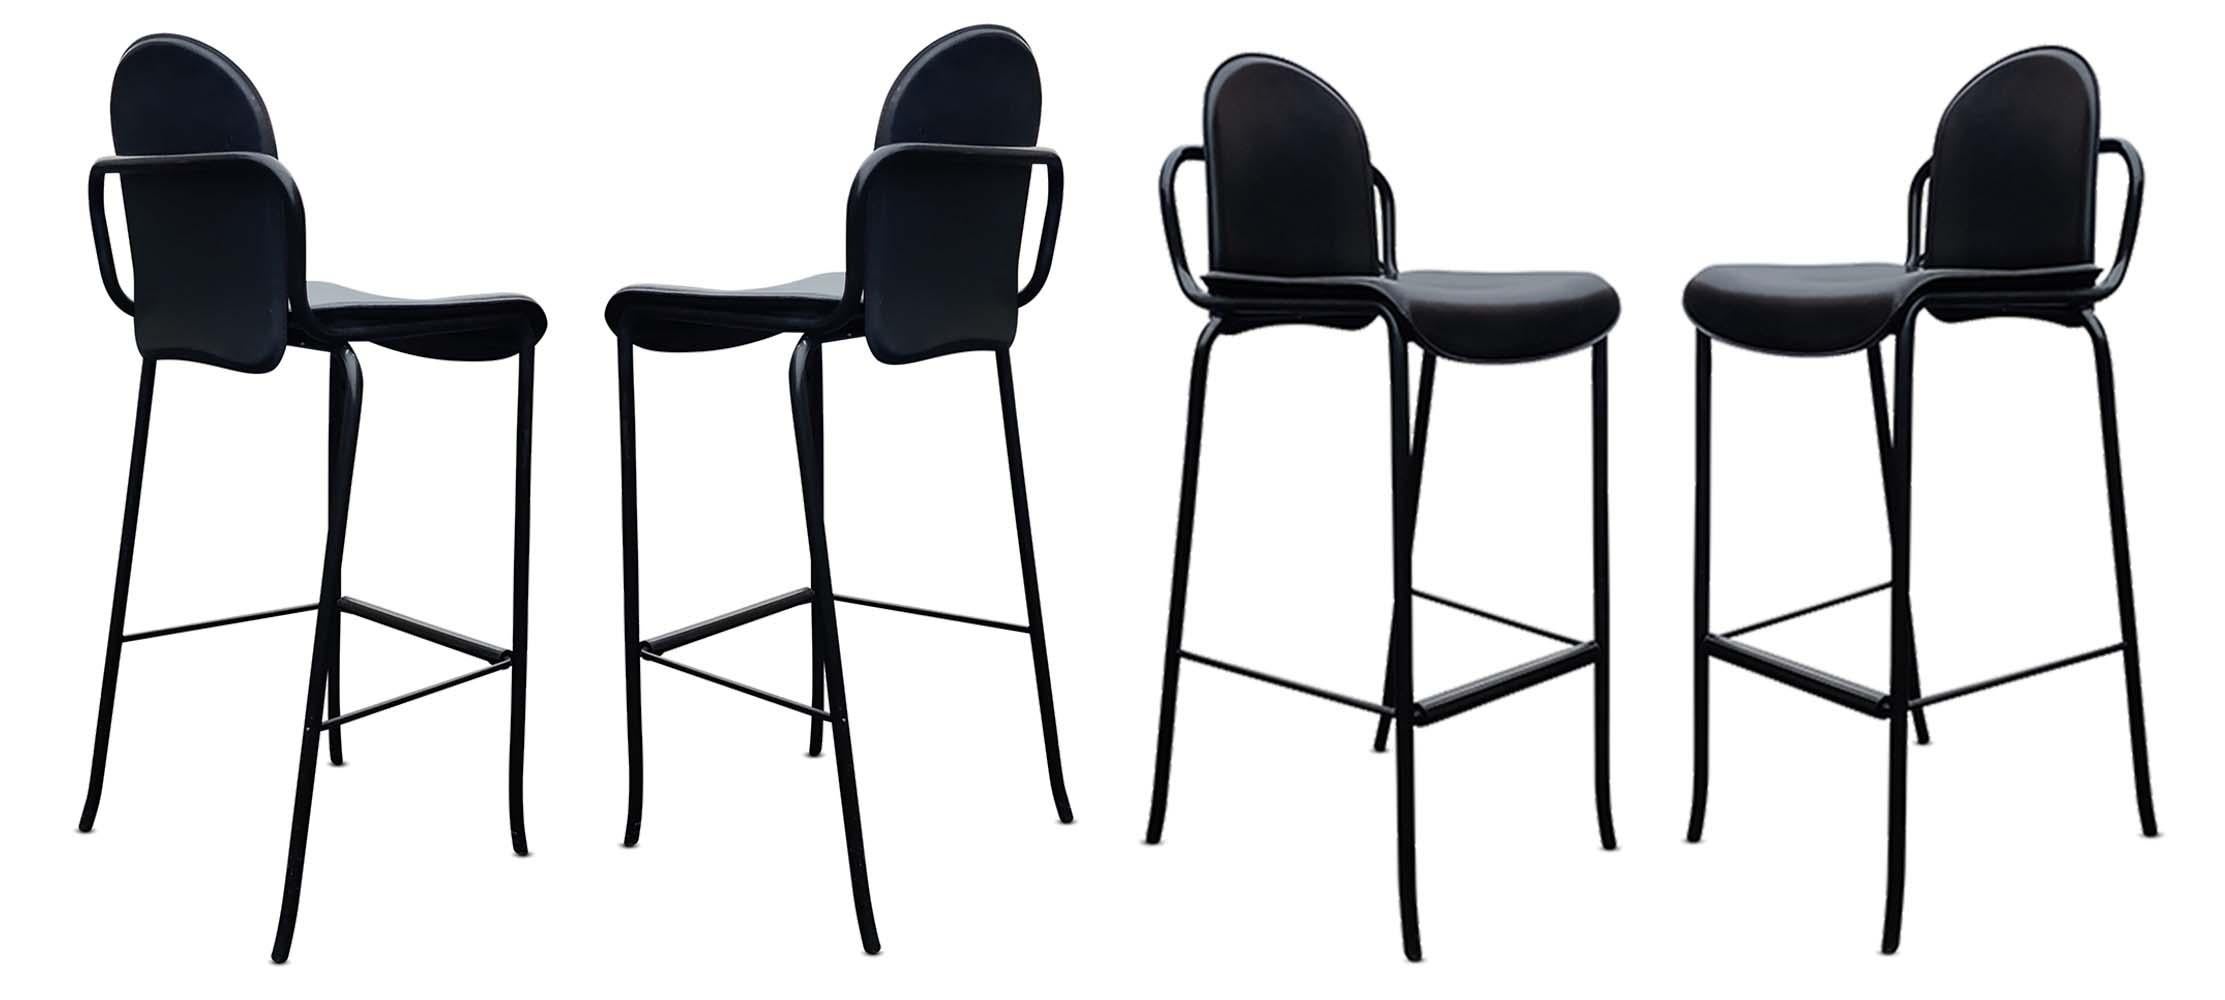 Three stitched leather, slim profile side, stools or barstools by legendary designer Willy Rizzo and manufactured by Cidue. Italian made is the late 1970s or early 1980s, high quality, super sleek, sturdy and very comfortable. All have